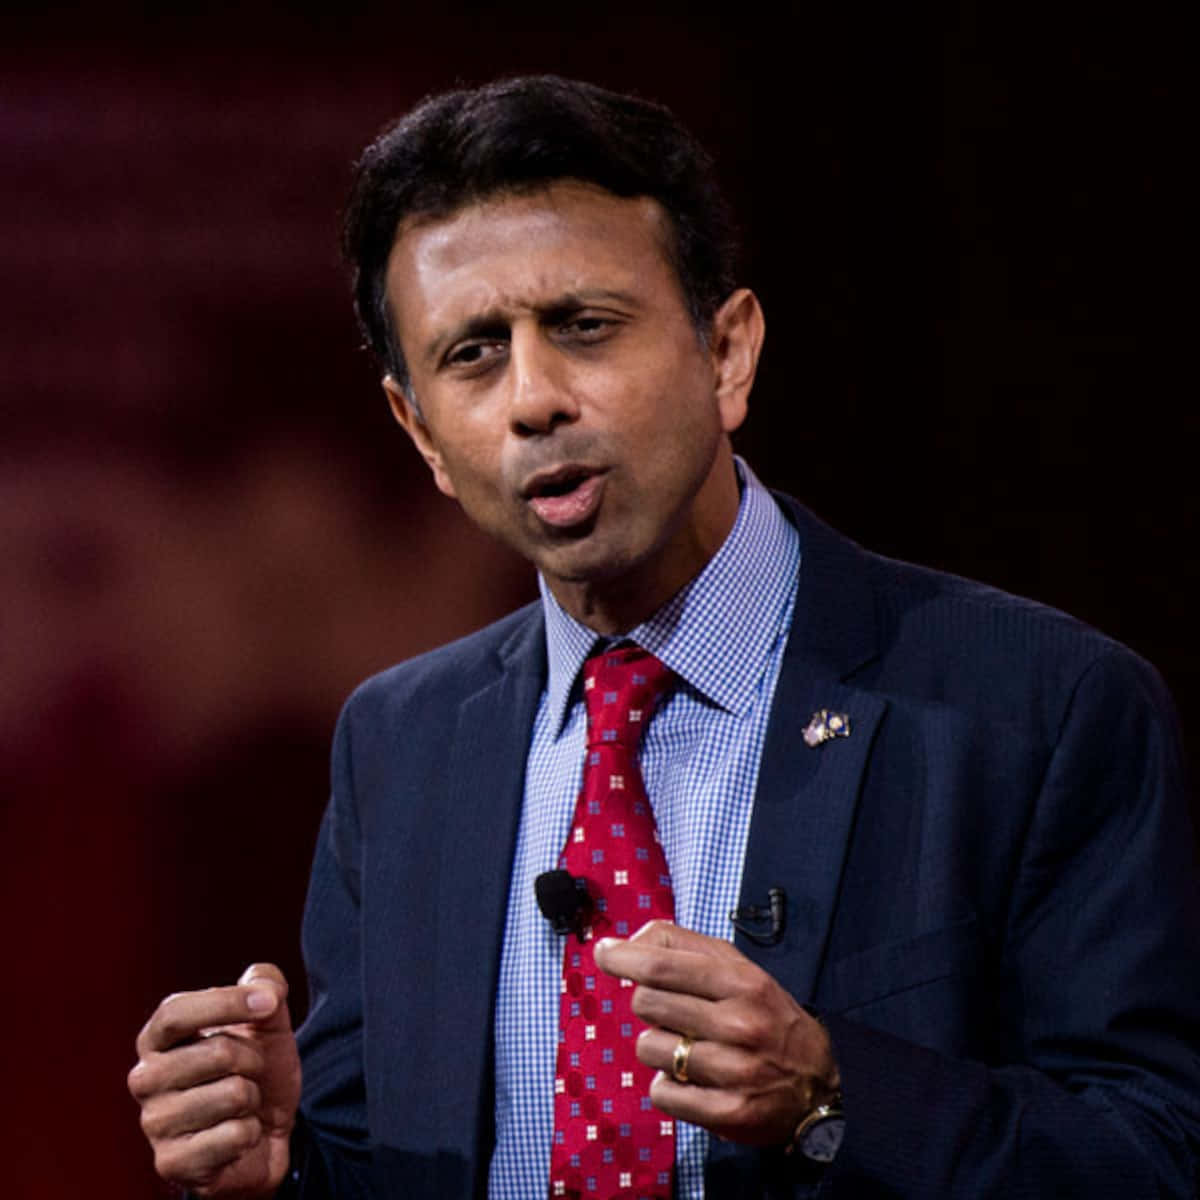 Bobby Jindal Answering a Question at a Press Conference Wallpaper